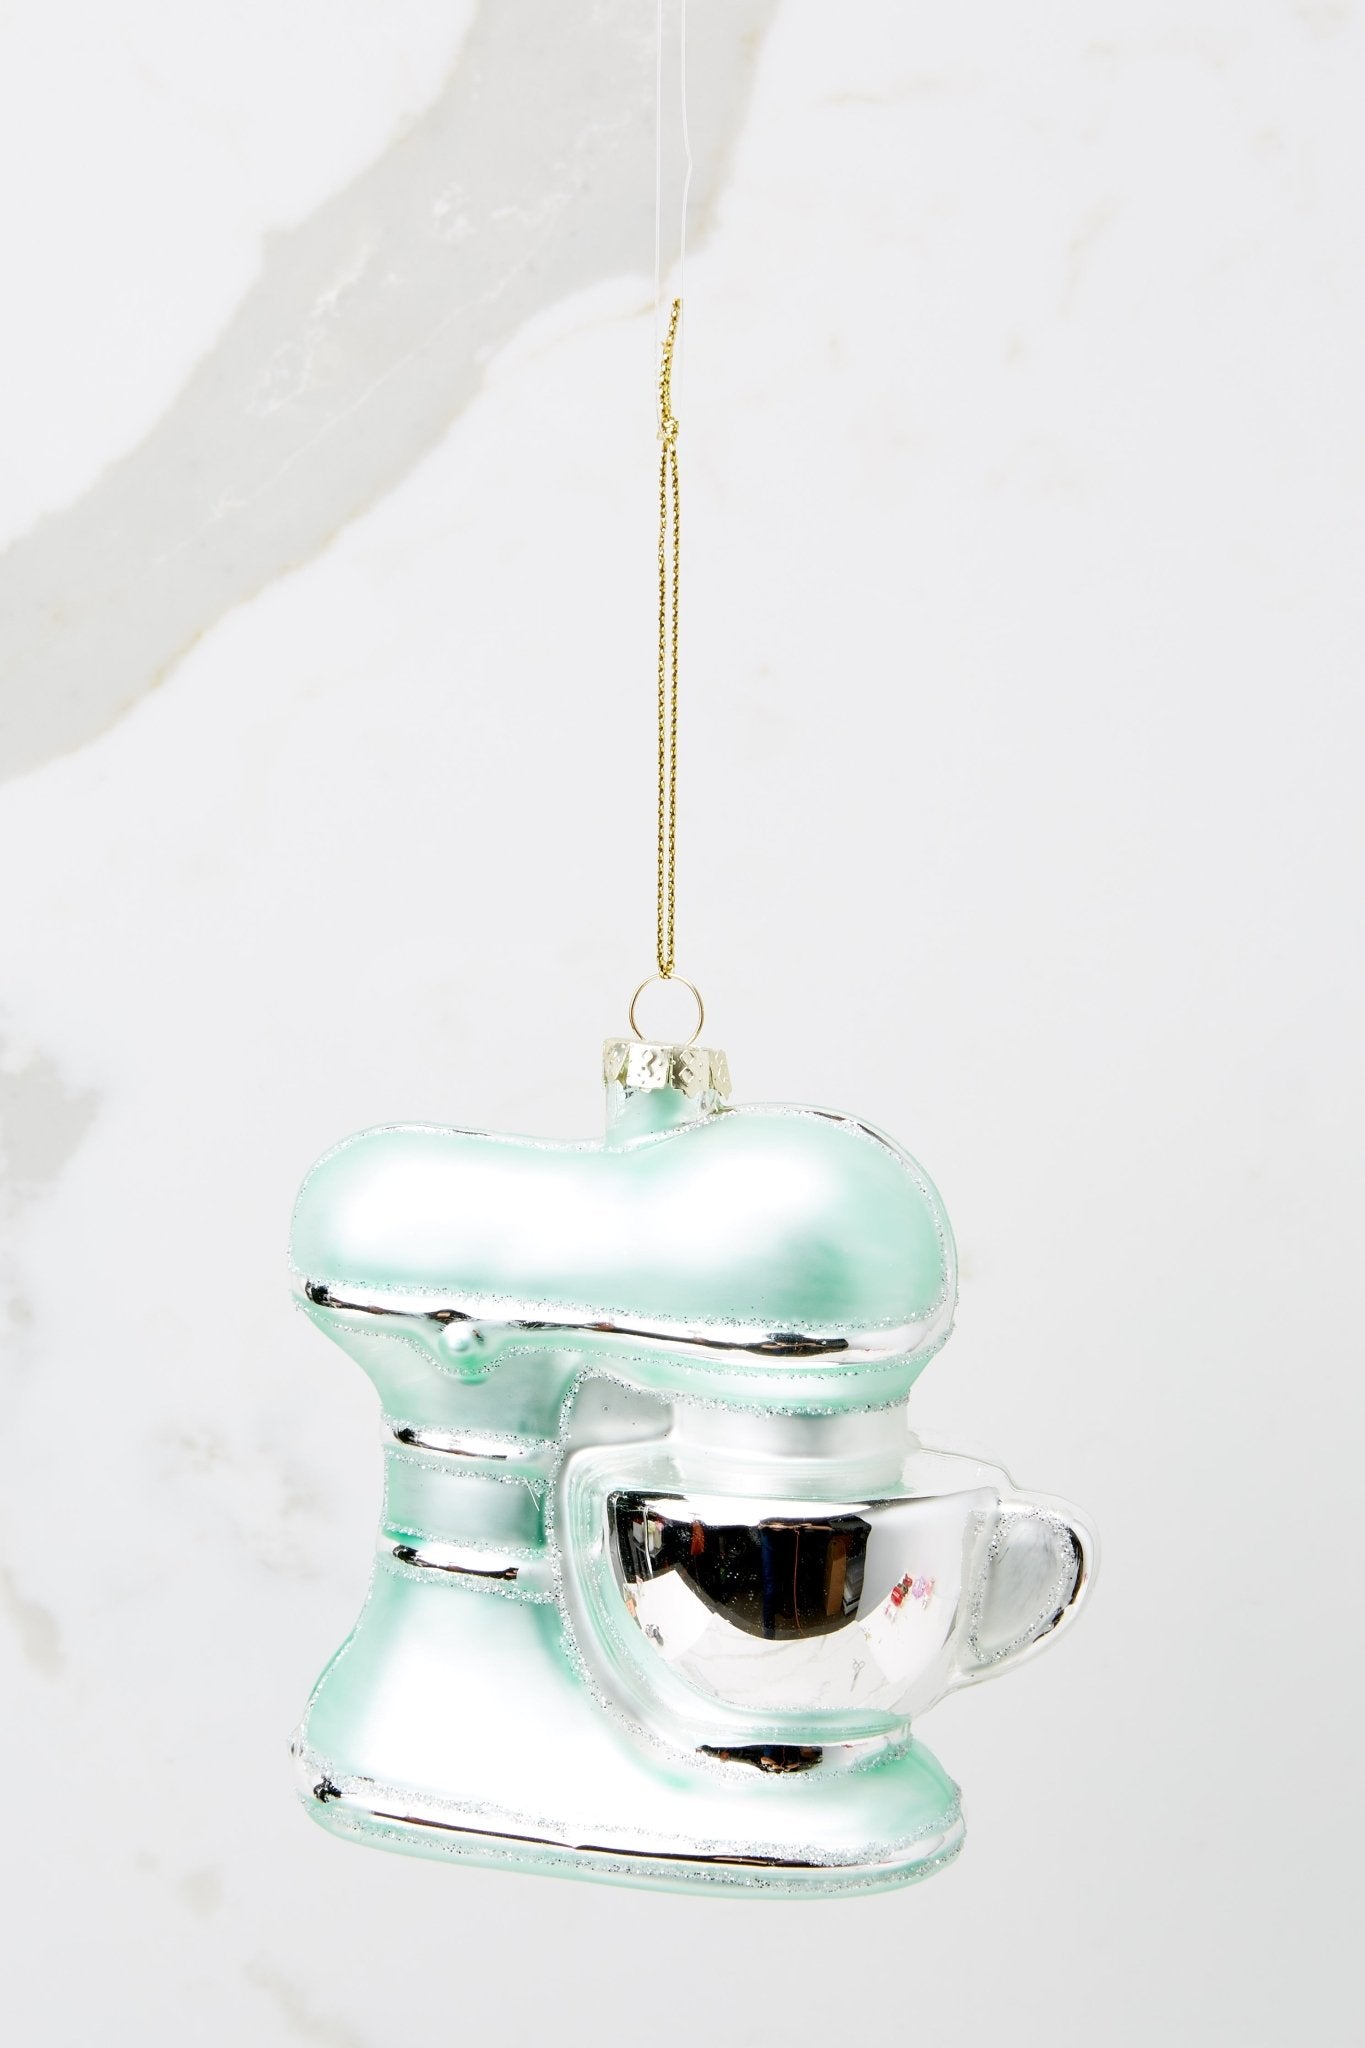 This turquoise ornament features a stand mixer design with a silver bowl.